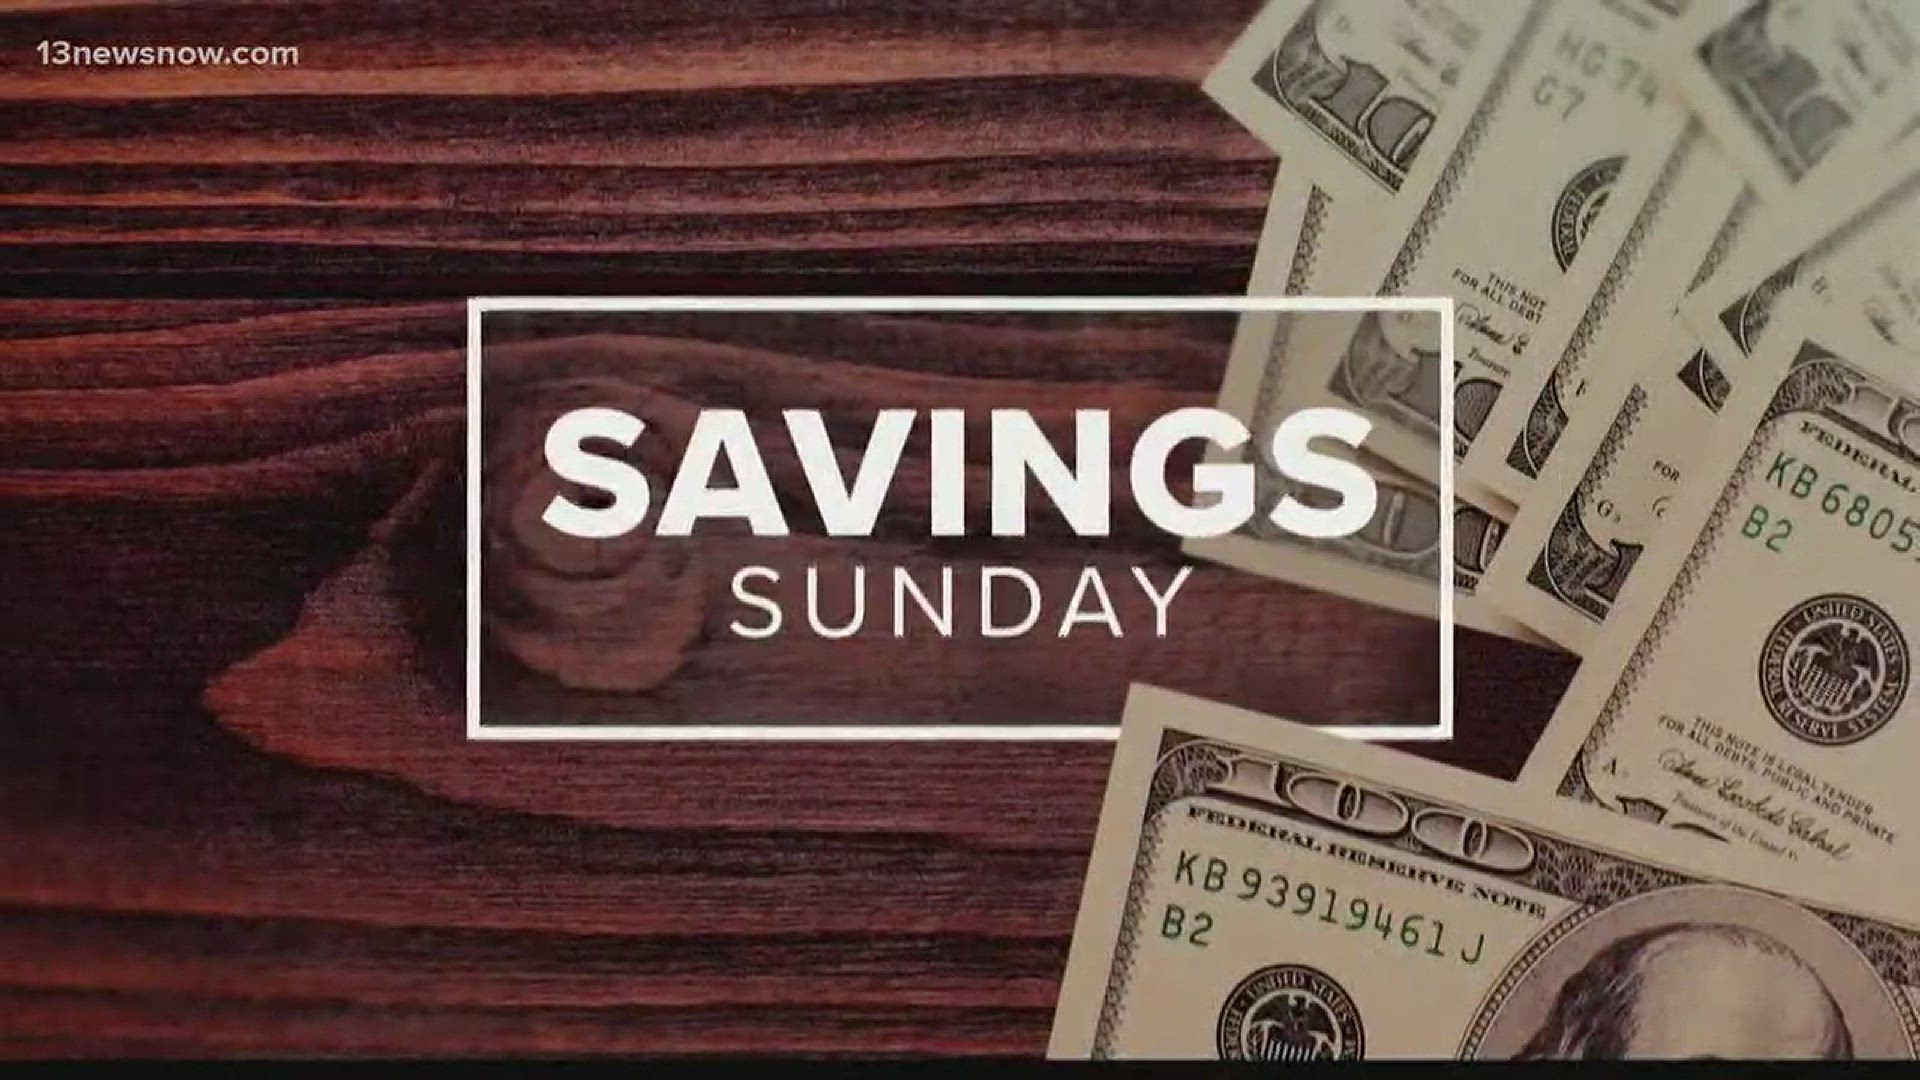 Laura Oliver from afrugralchick.com has your big savings for the week of June 17, 2018.